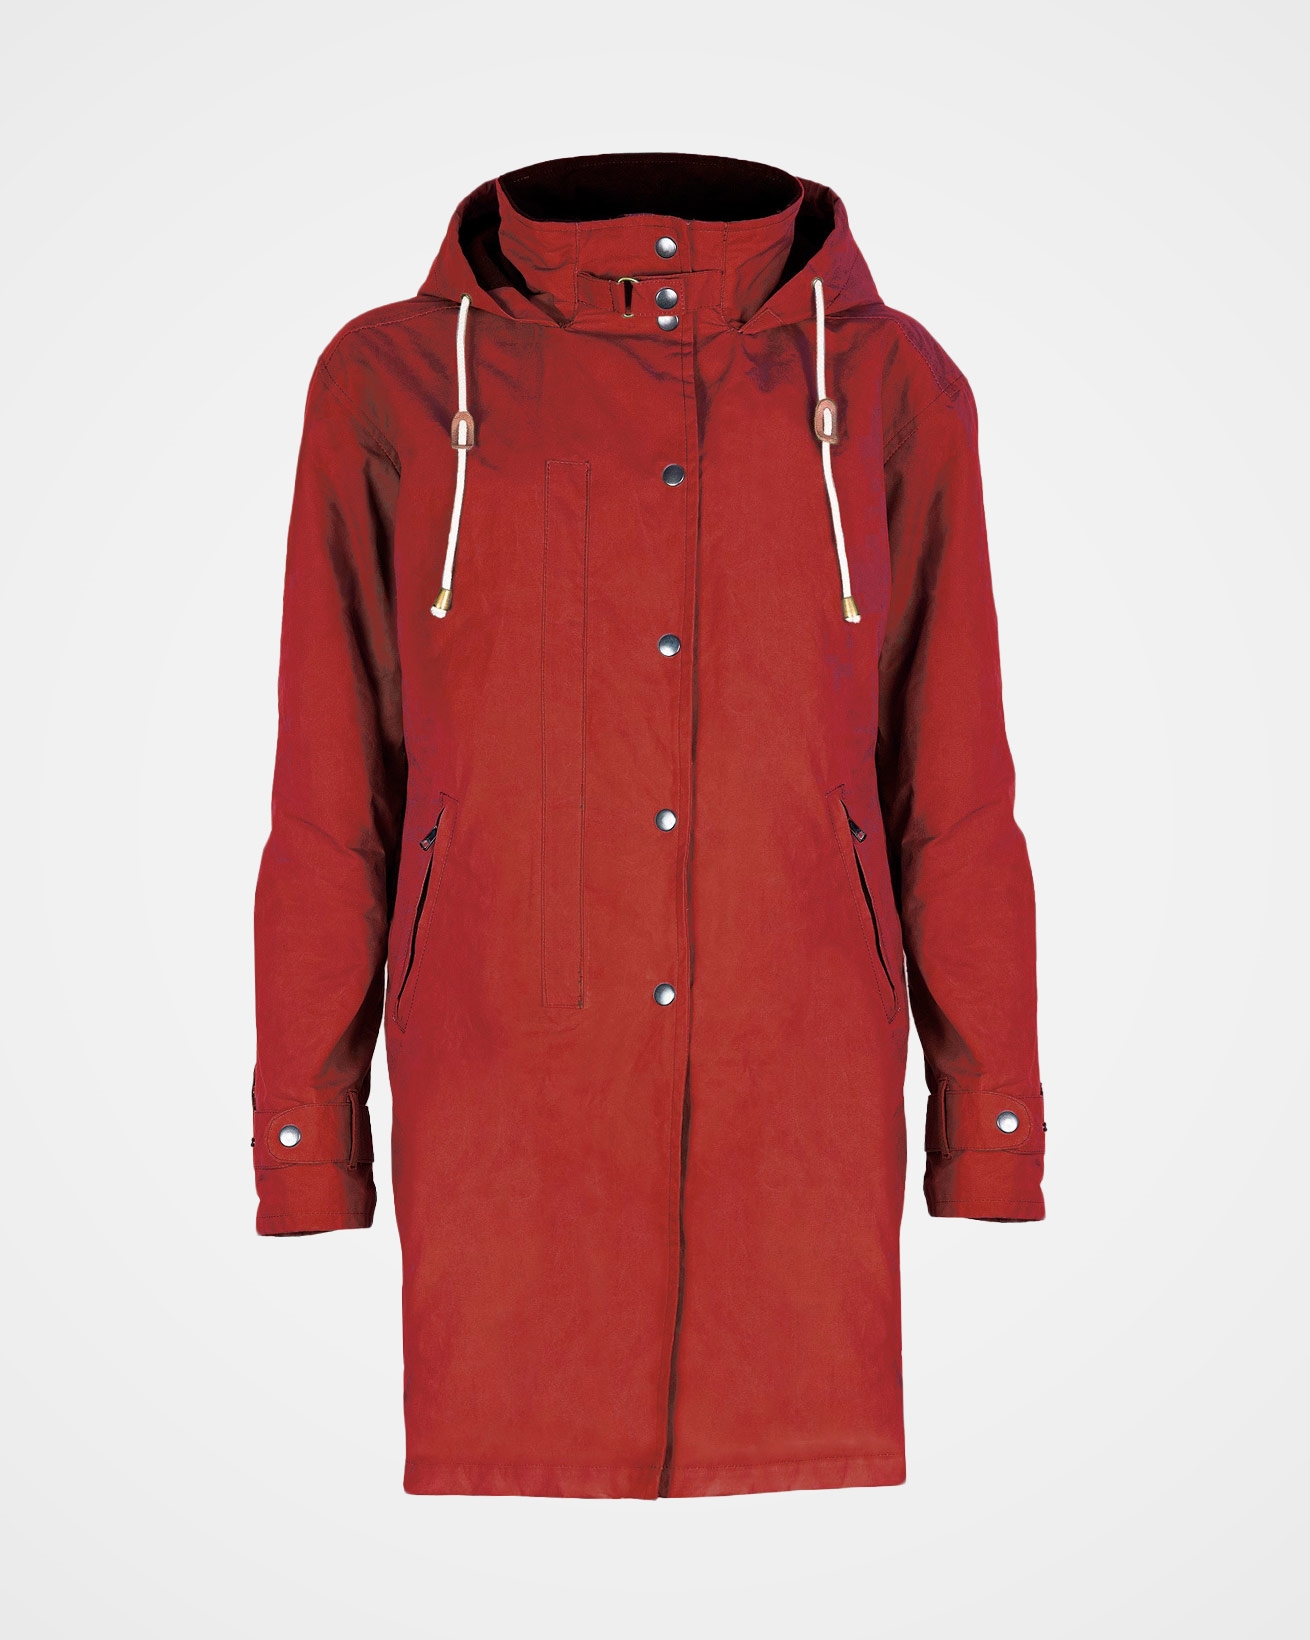 7431_waxed-cotton-parka_red_front.jpg